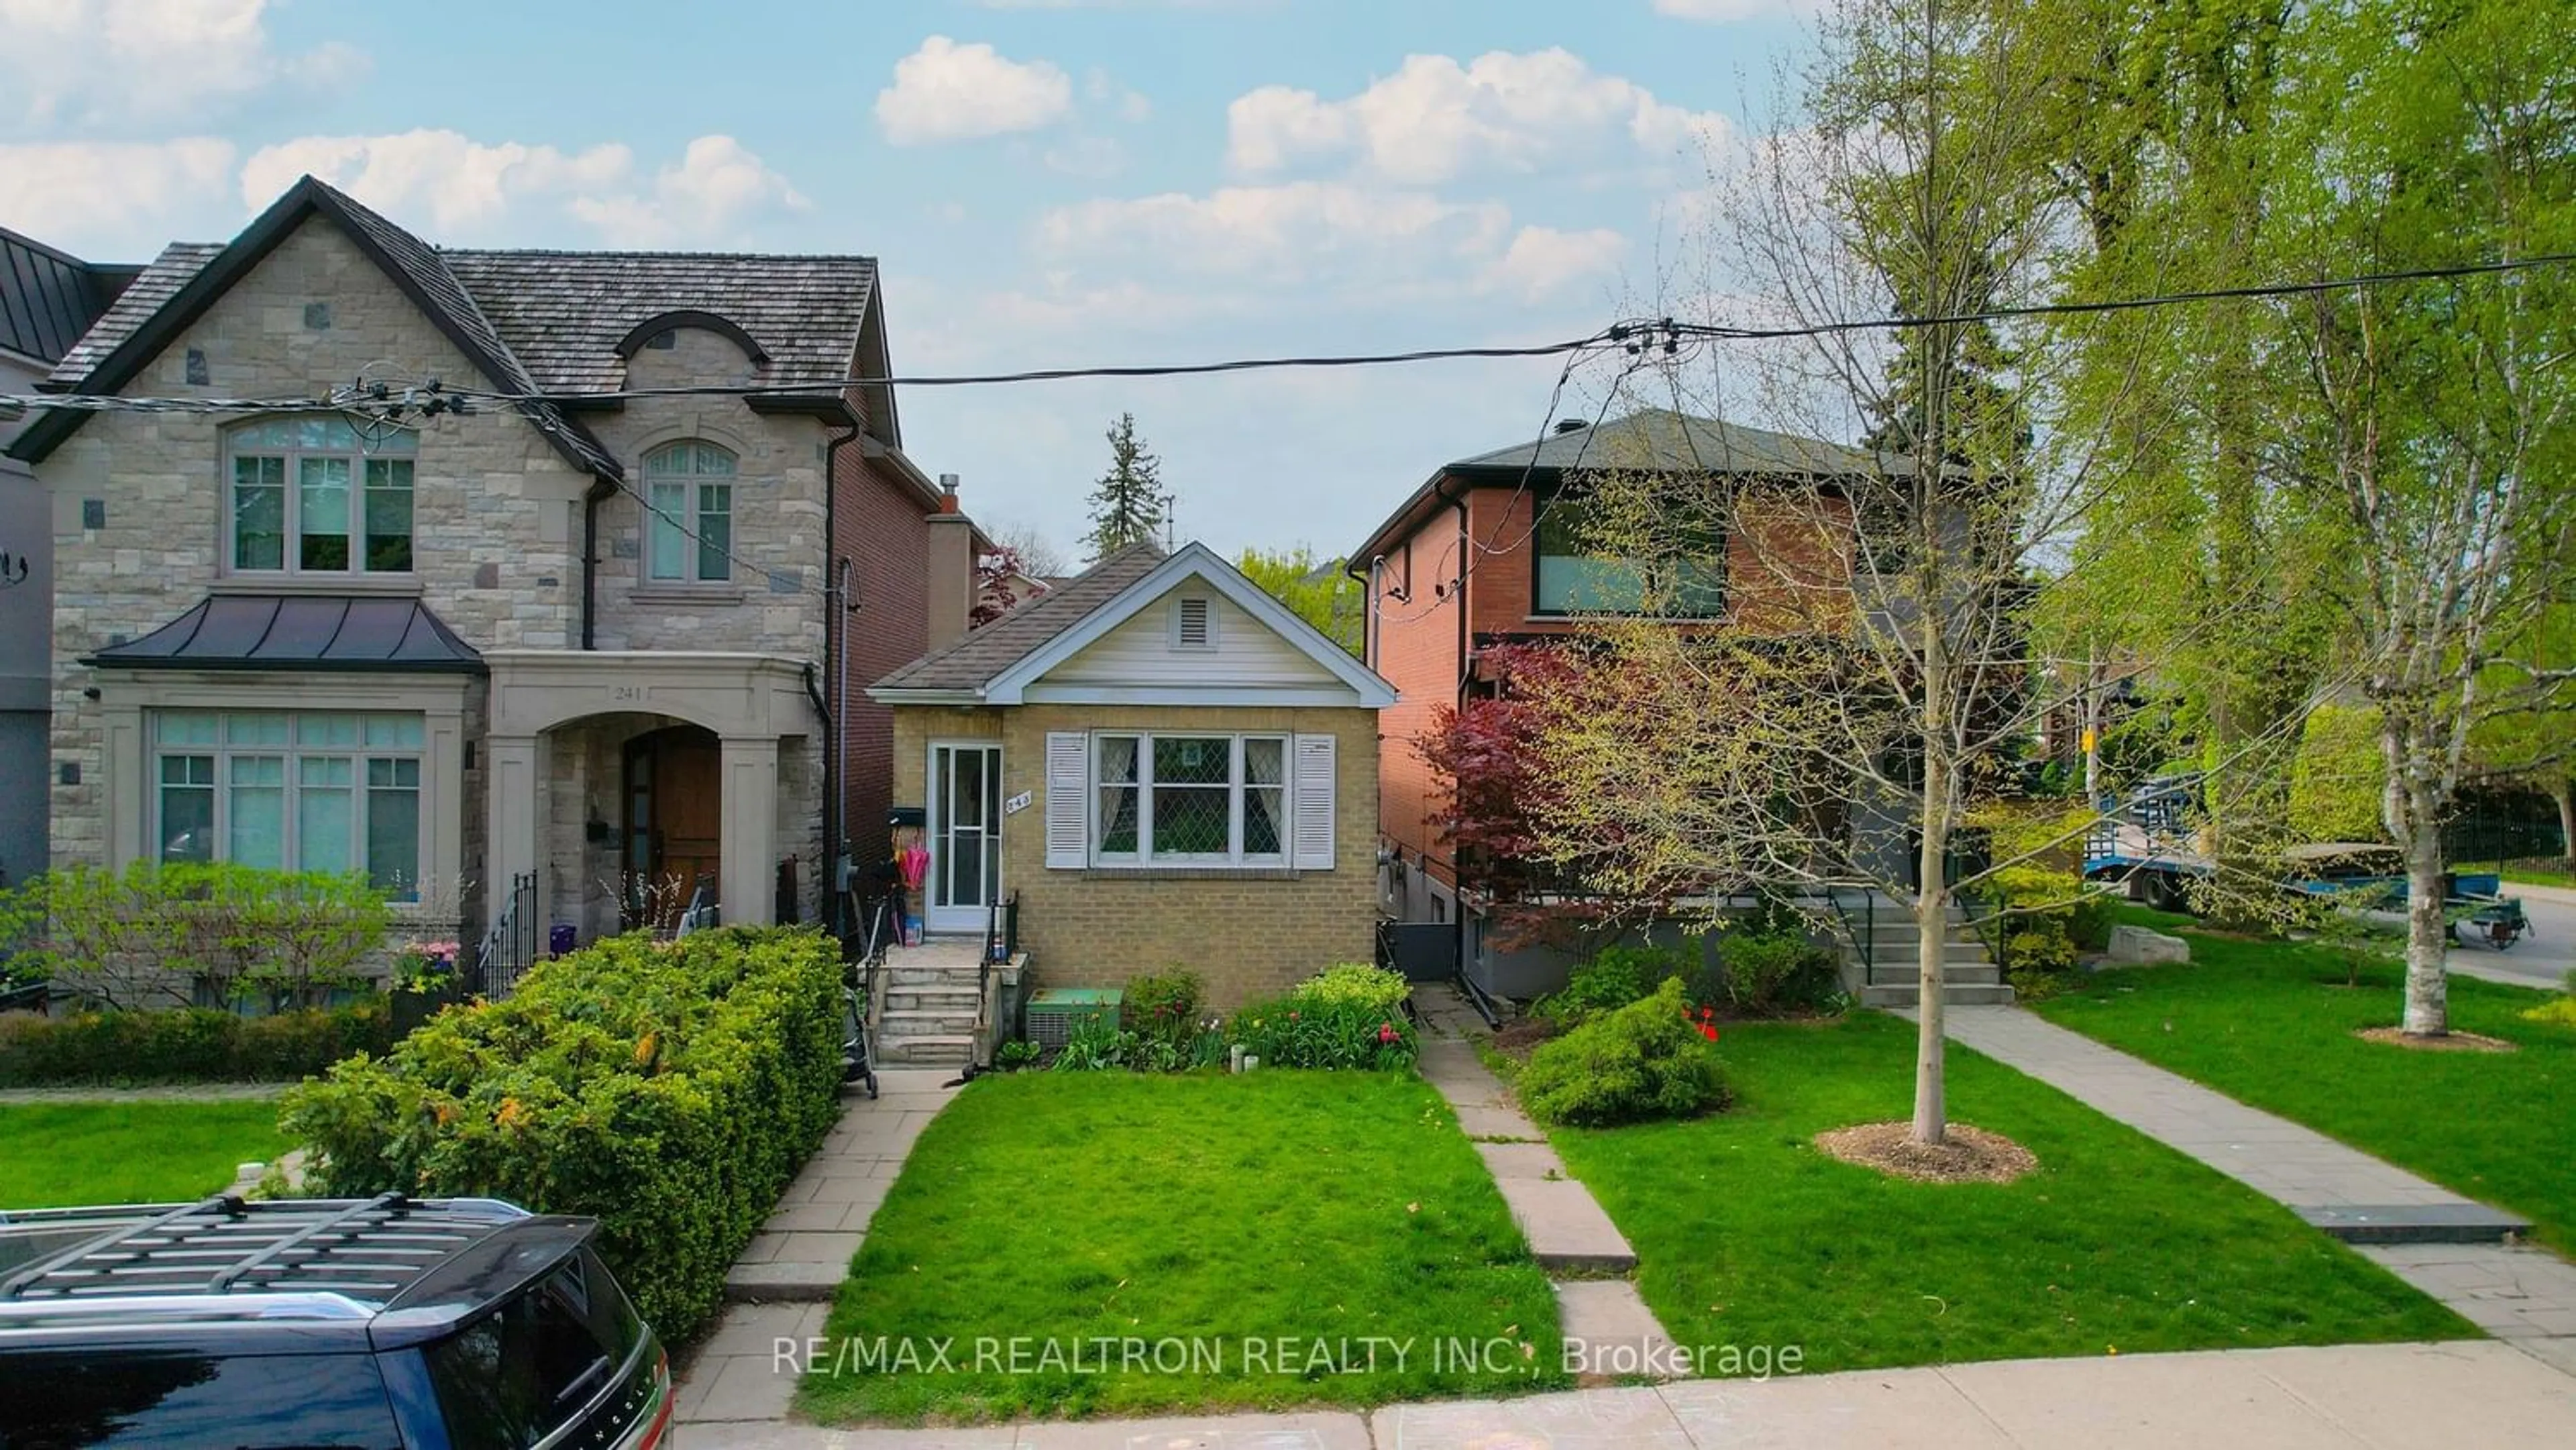 Frontside or backside of a home for 243 Bedford Park Ave, Toronto Ontario M5M 1J4